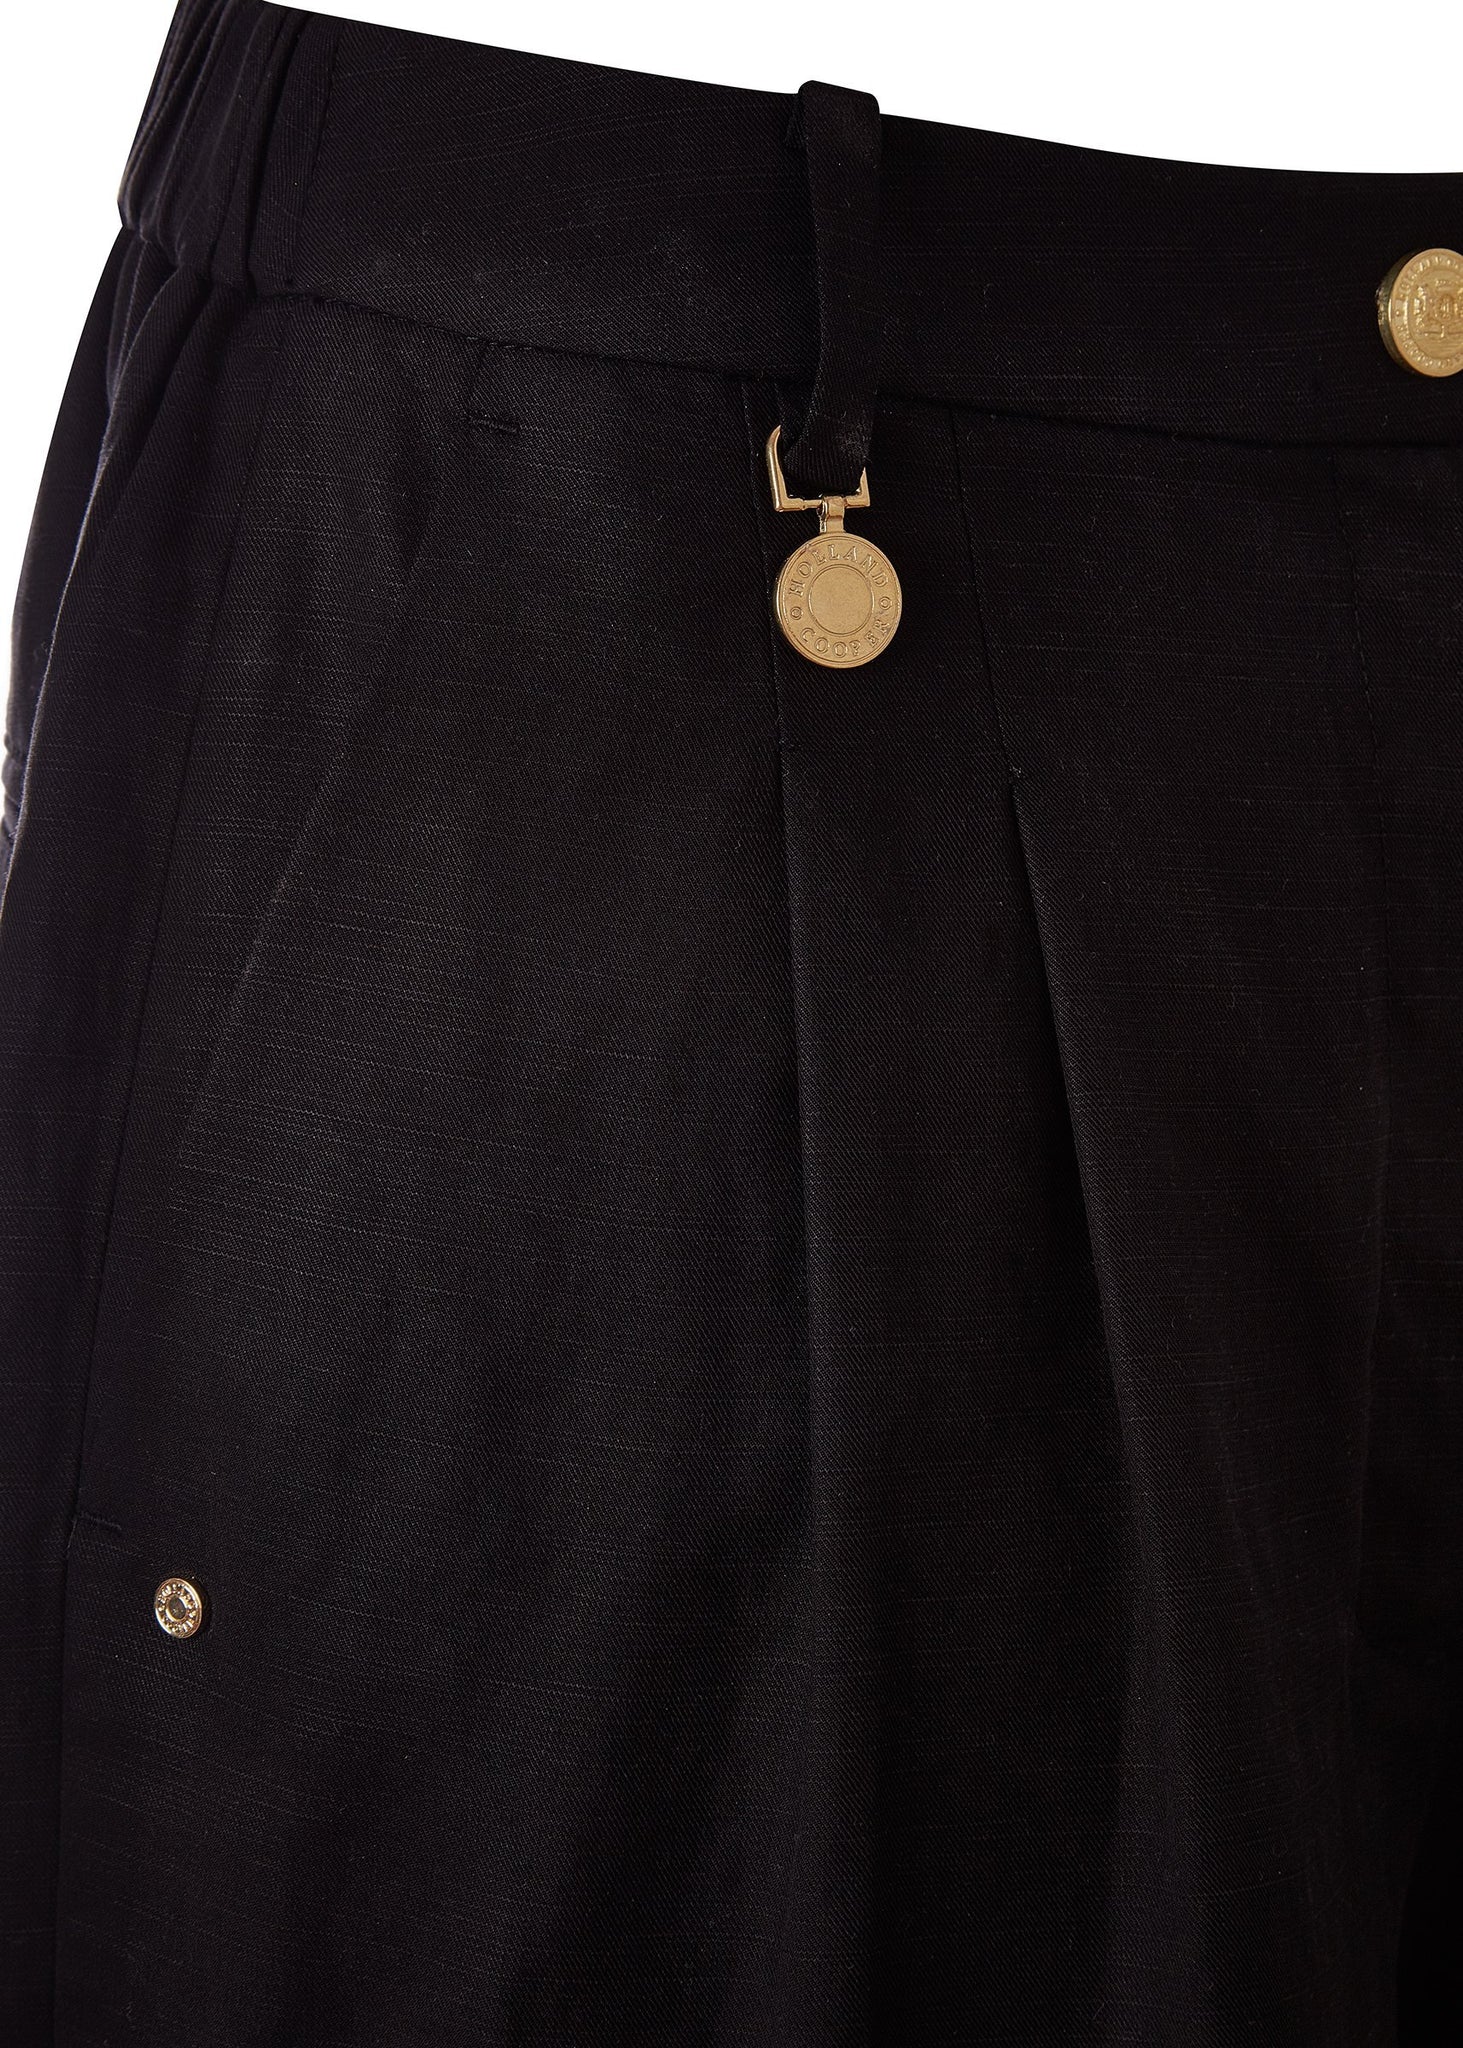 side pocket detail of womens black shorts with double front pleats and turned up hem with two open front pockets and centre front zip fly fastening and a signature gold hc button